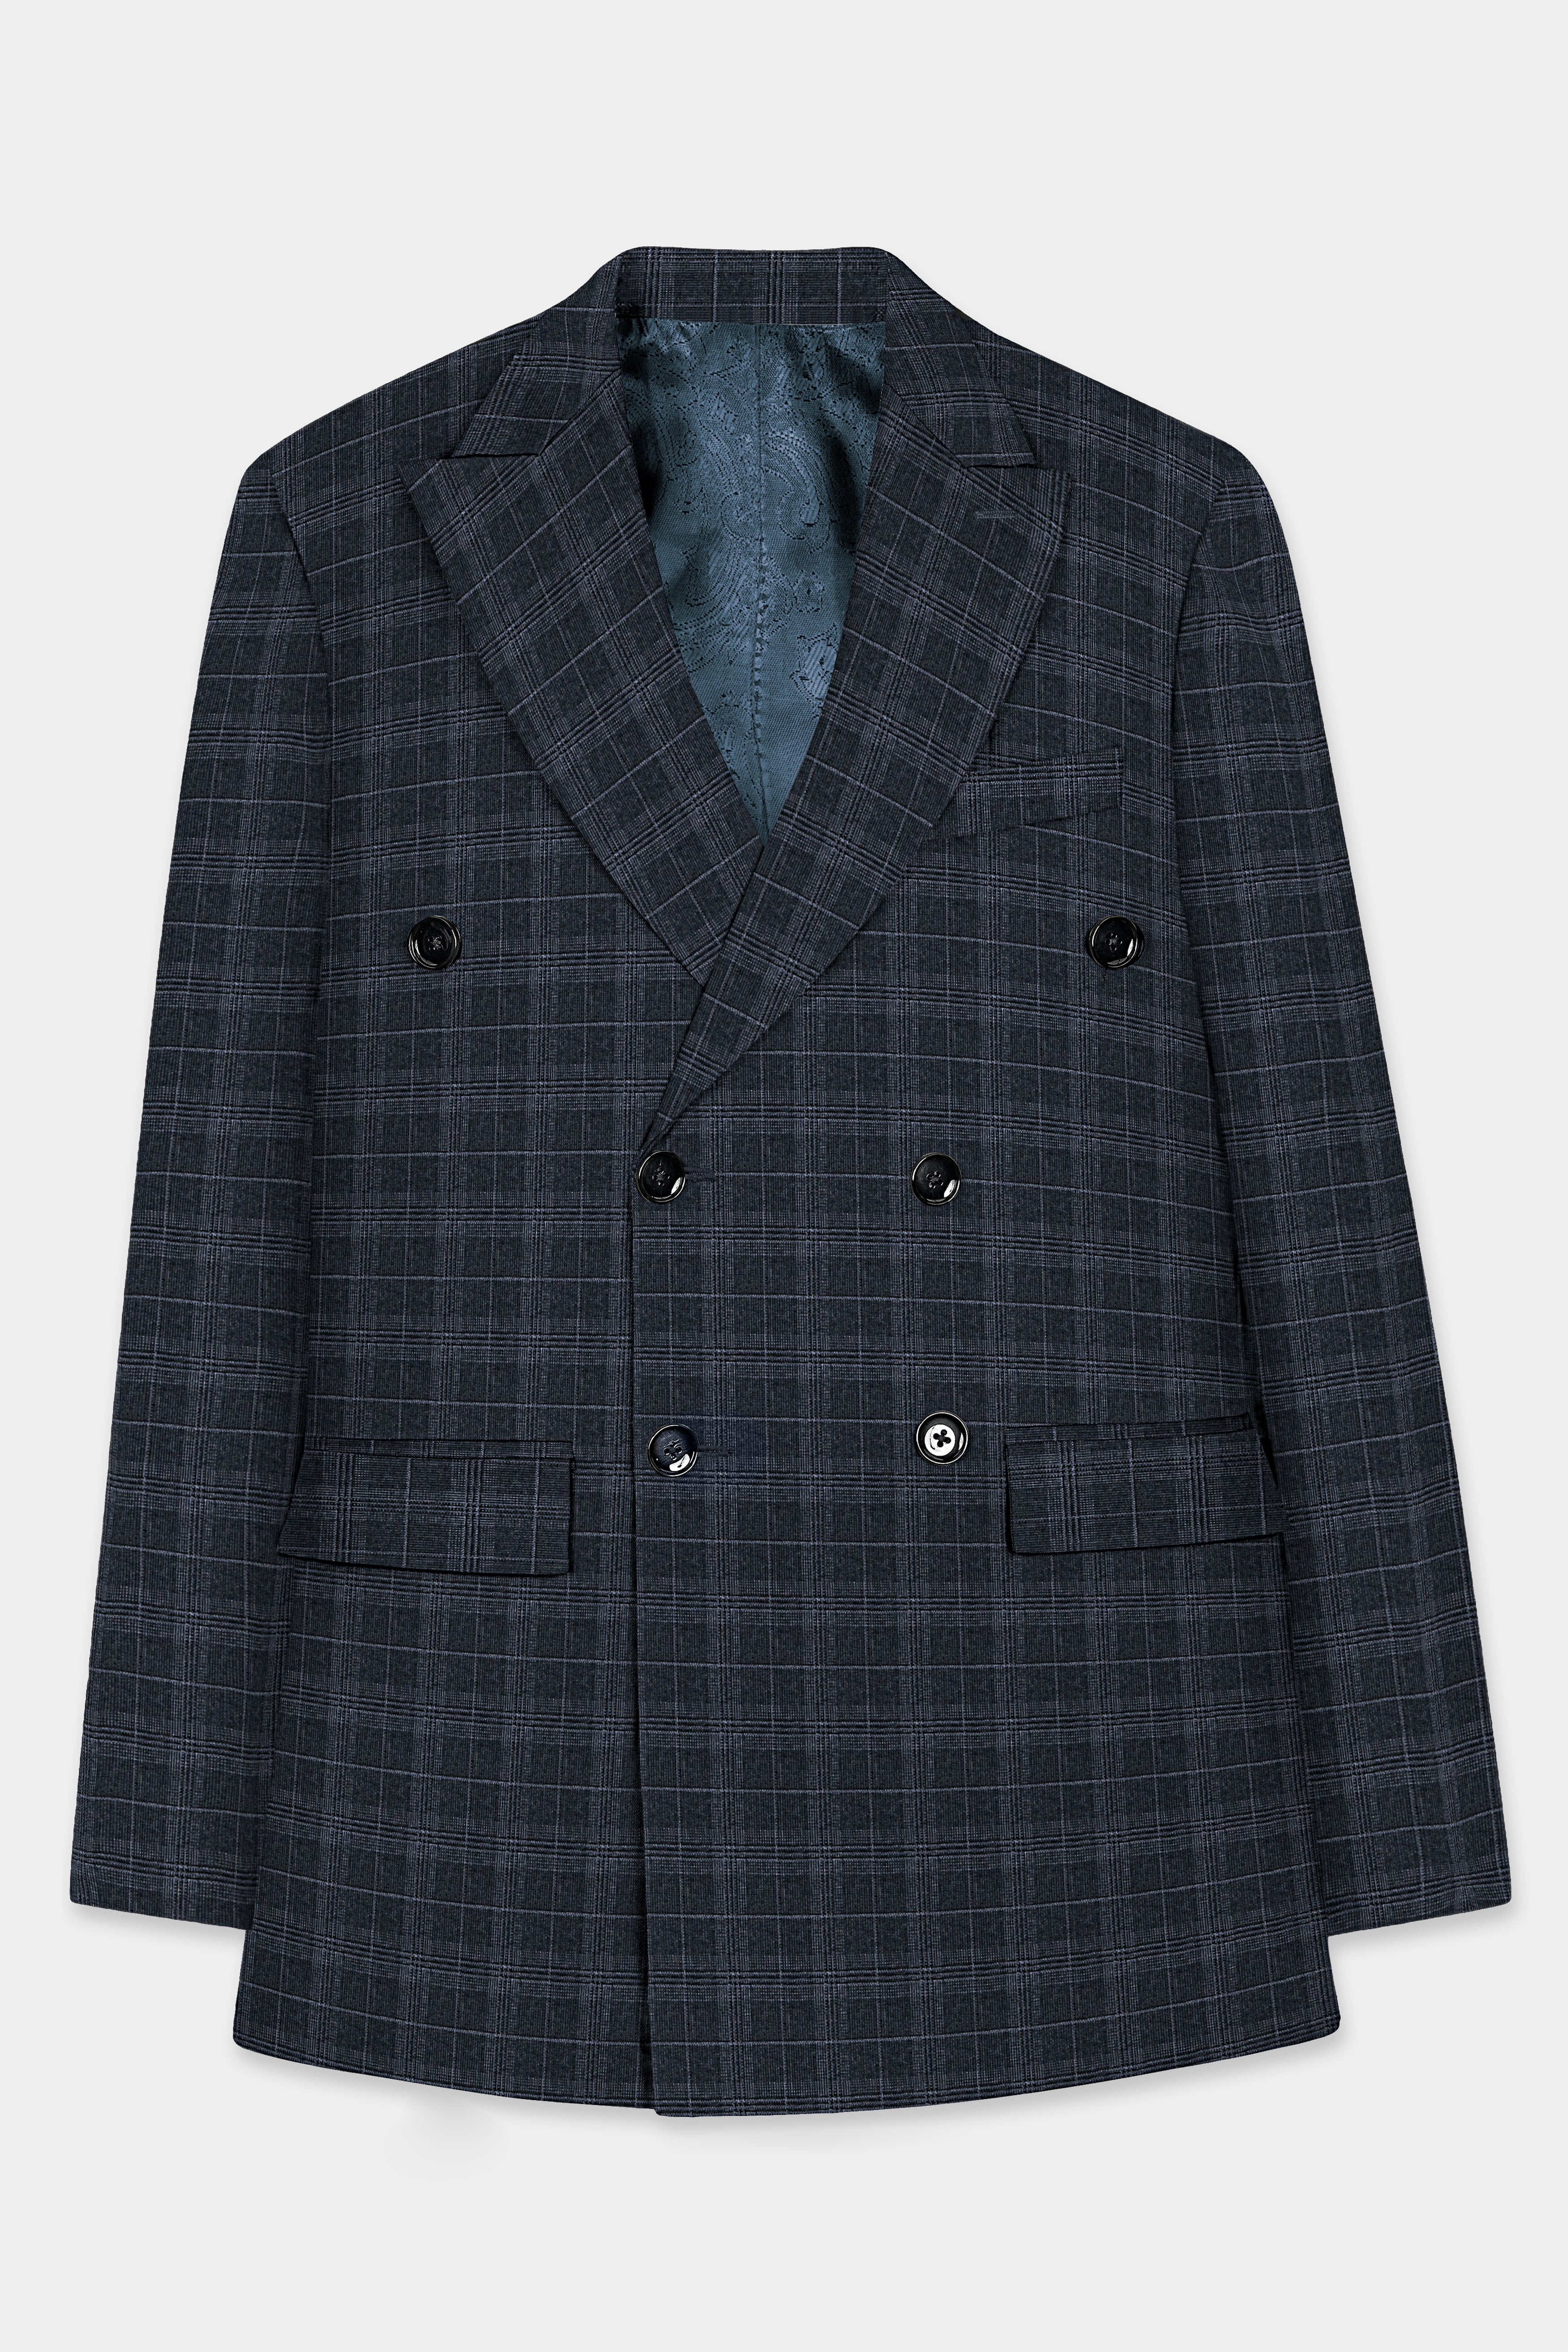 Iridium Dark Gray With Mobster Gray Plaid Wool Rich Double Breasted Blazer